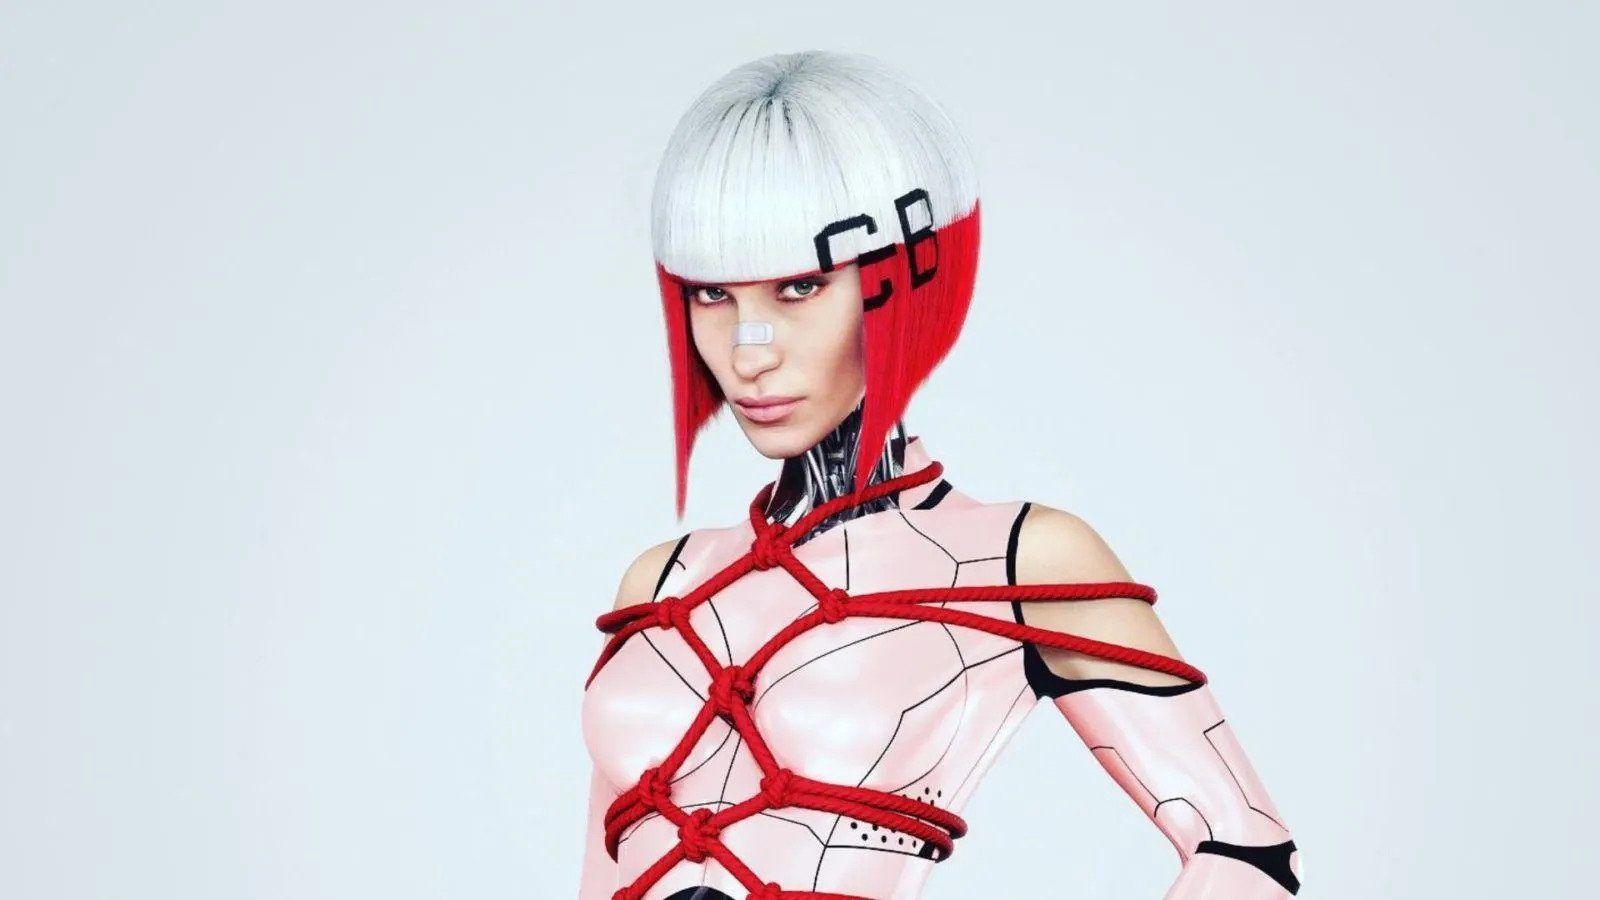 From model to cyborg, Bella Hadid is entering the metaverse